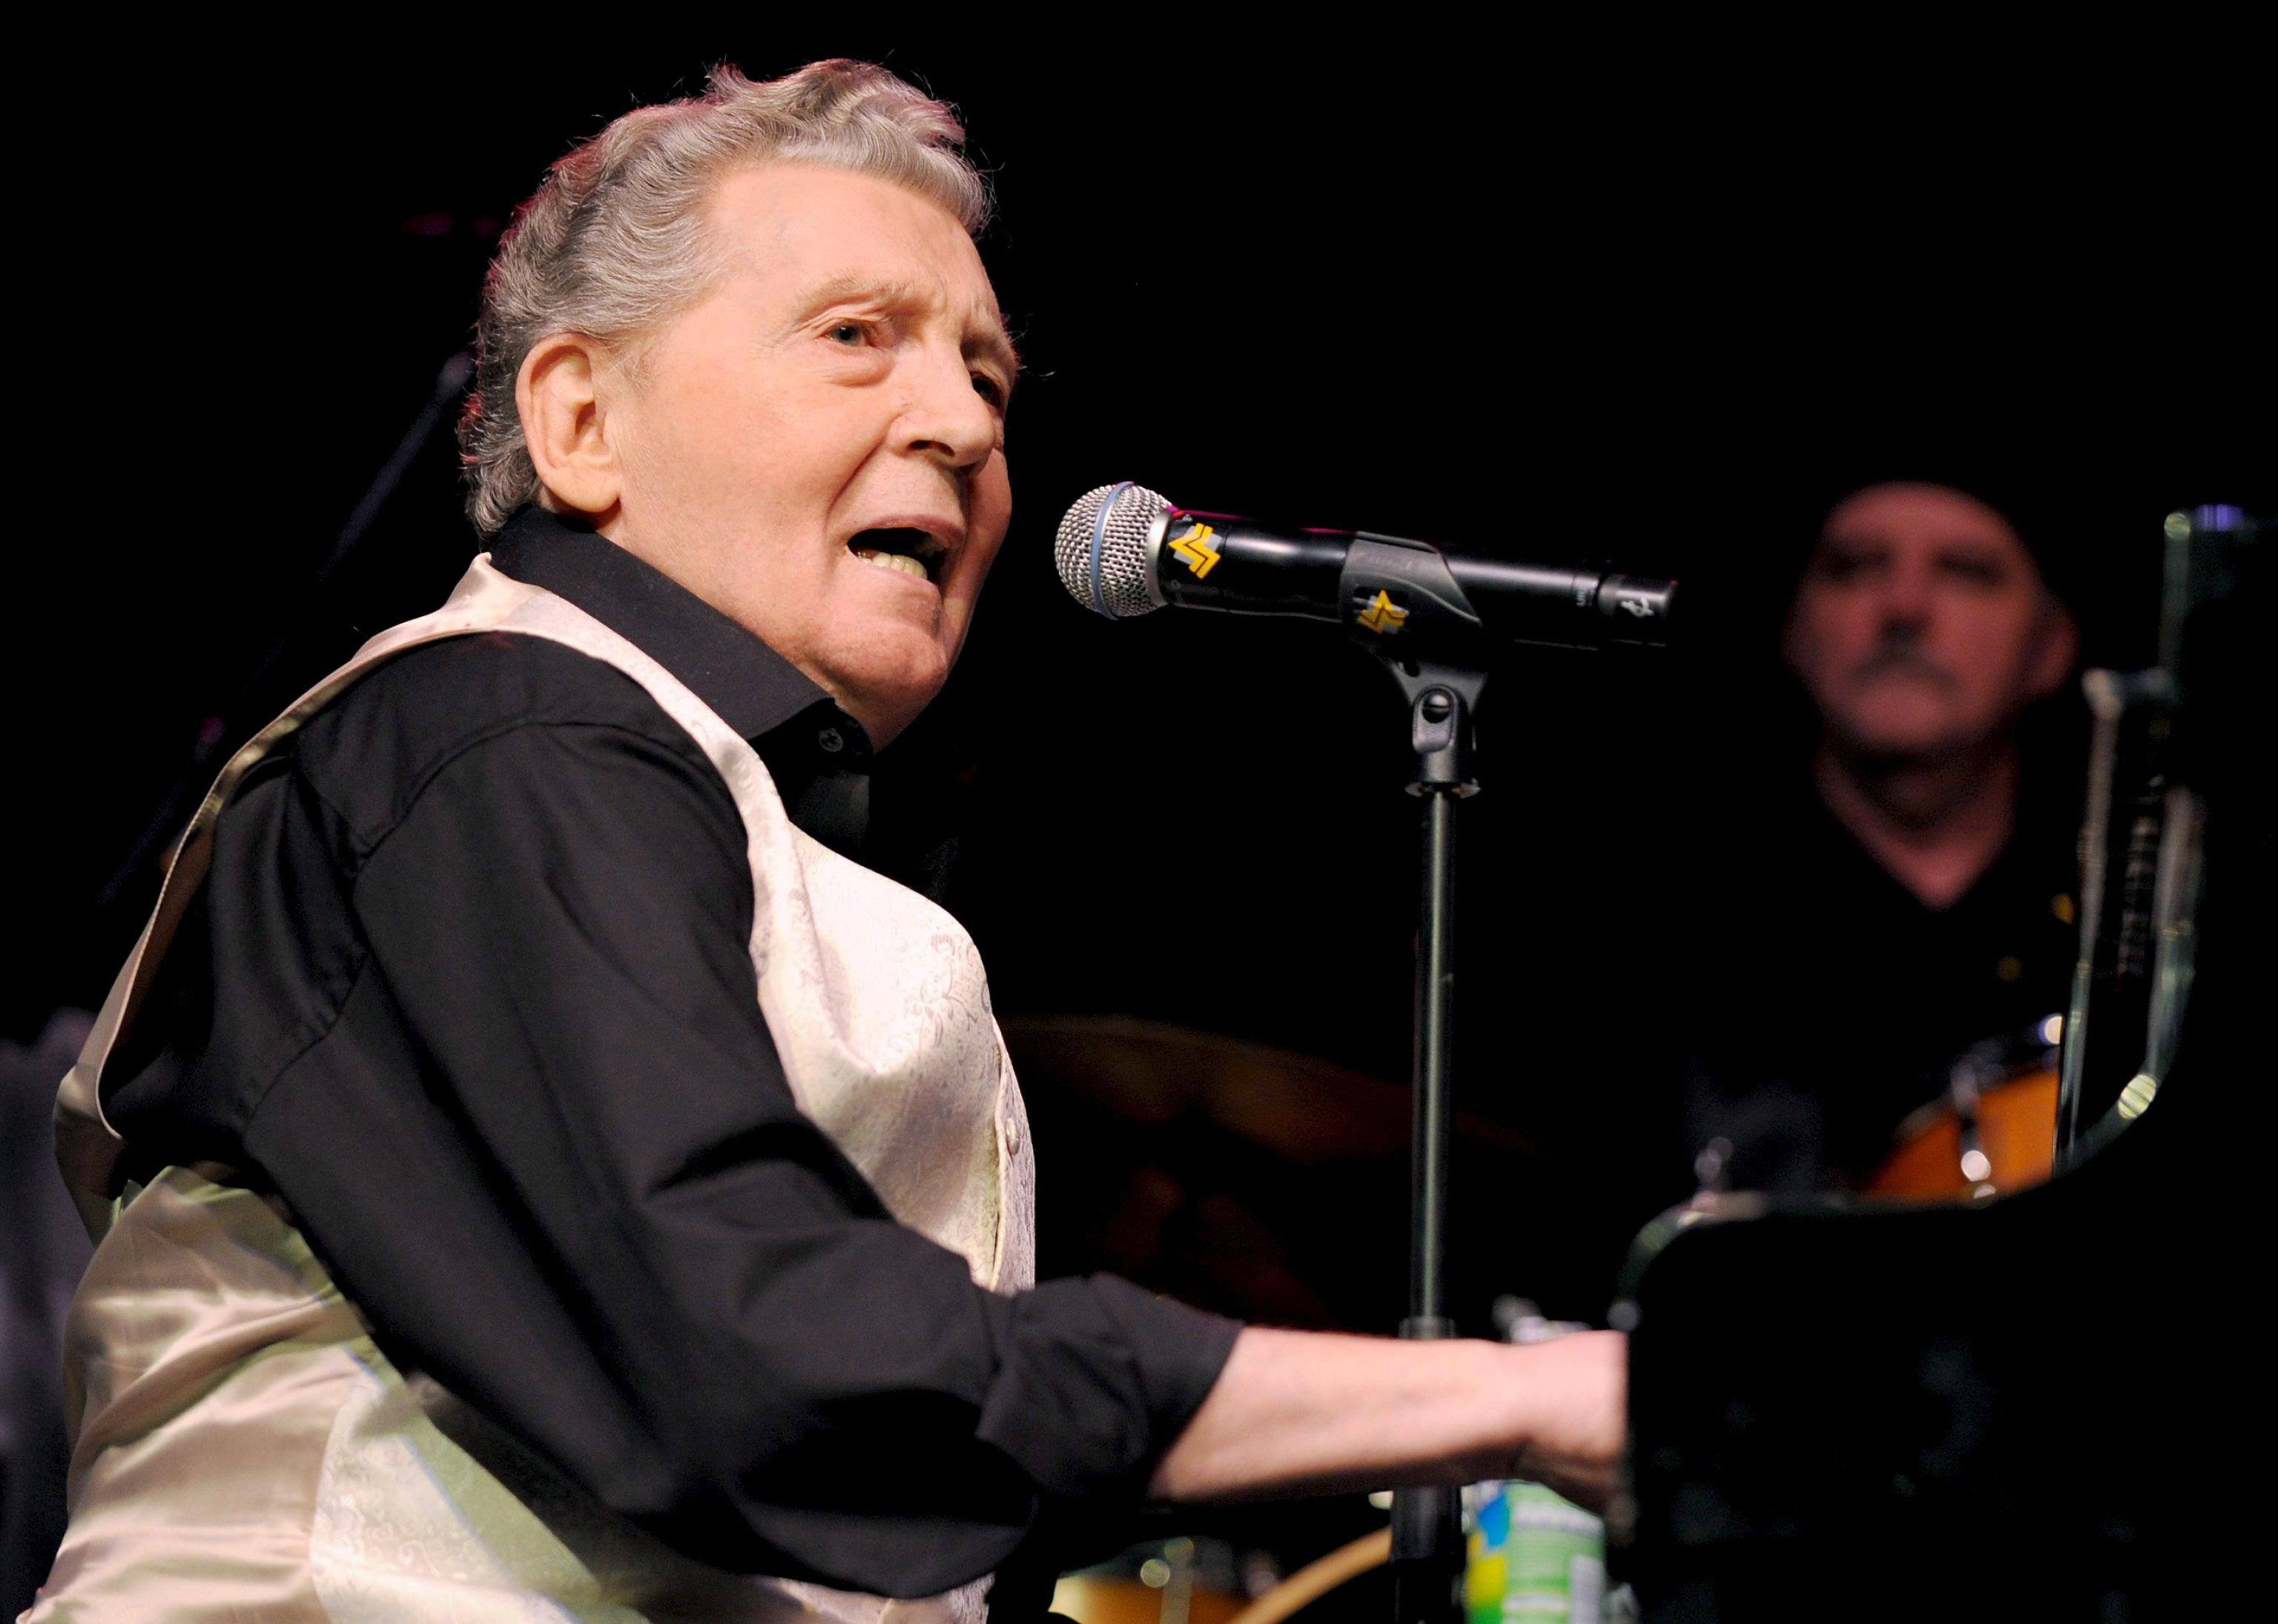 epa01558102 US singer Jerry Lee Lewis performs during a joint concert with fellow musician Chuck Berry (not in the picture) in Mannheim, Germany 22 November 2008. The two legends of rock 'n' roll performed their only joint concert in Germany on the stage of Mannheim's SAP Arena.  EPA/RONALD WITTEK